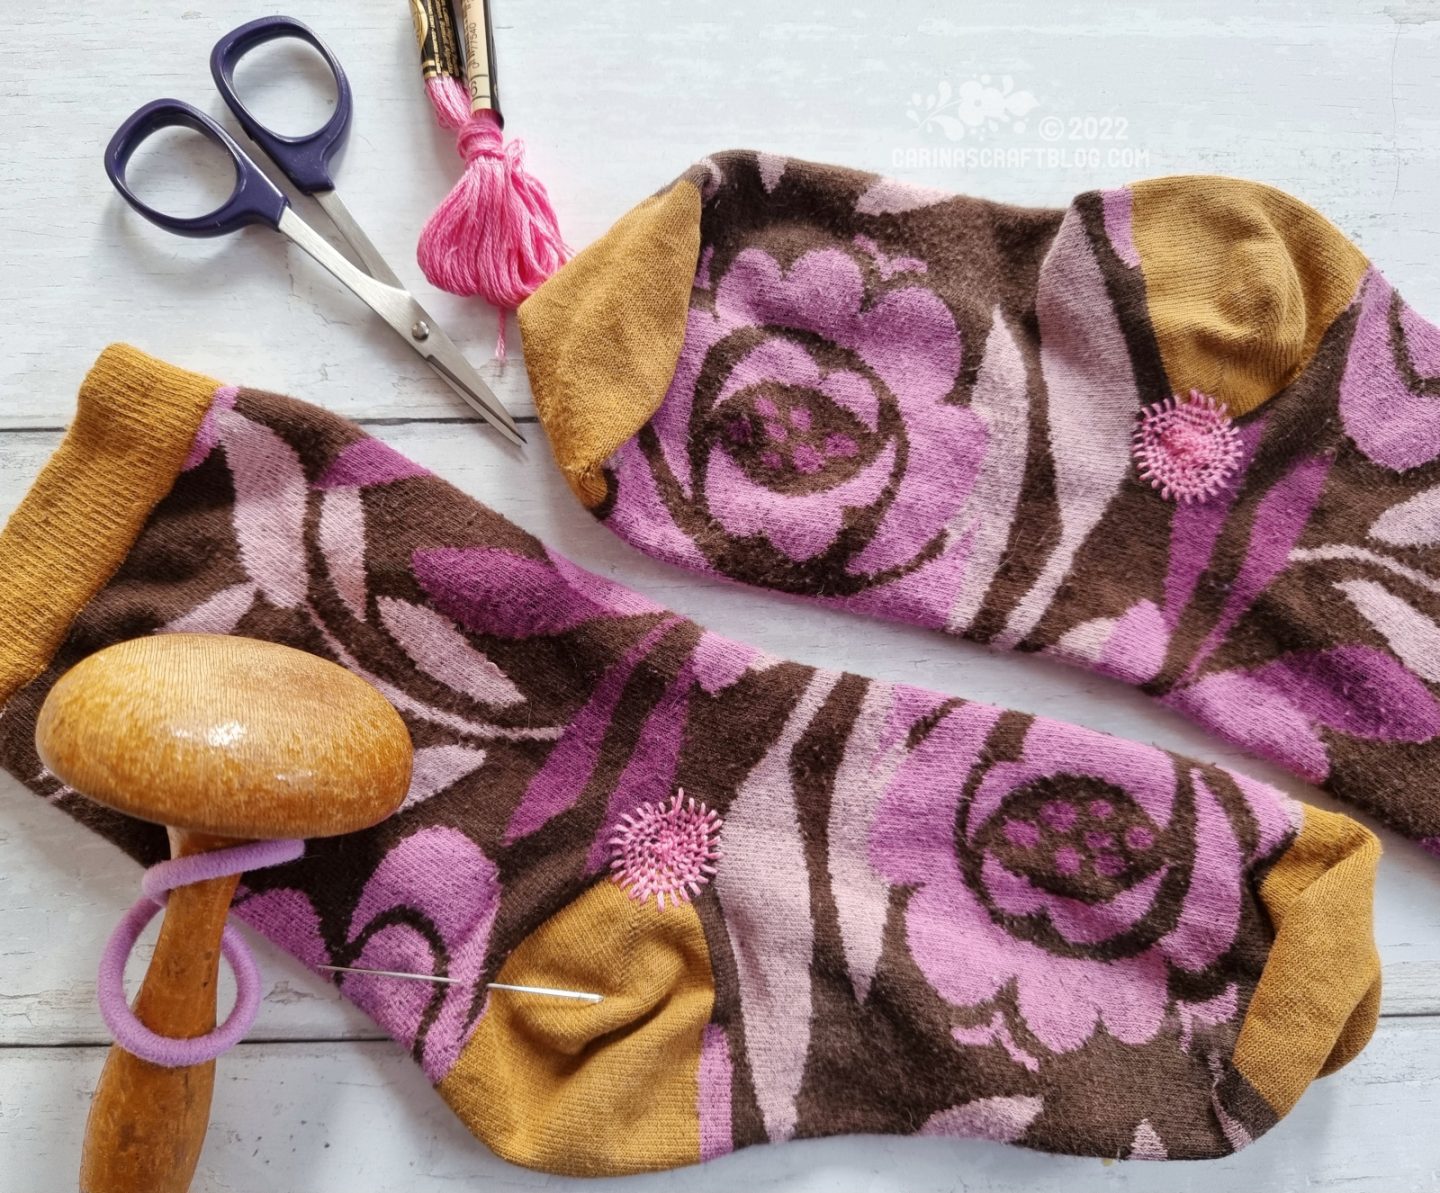 A pair of brown socks with a pink flower pattern and mustard coloured heels and toes. Surrounded by skein of pink thread, a small pair of scissors and a wooden darning mushroom.